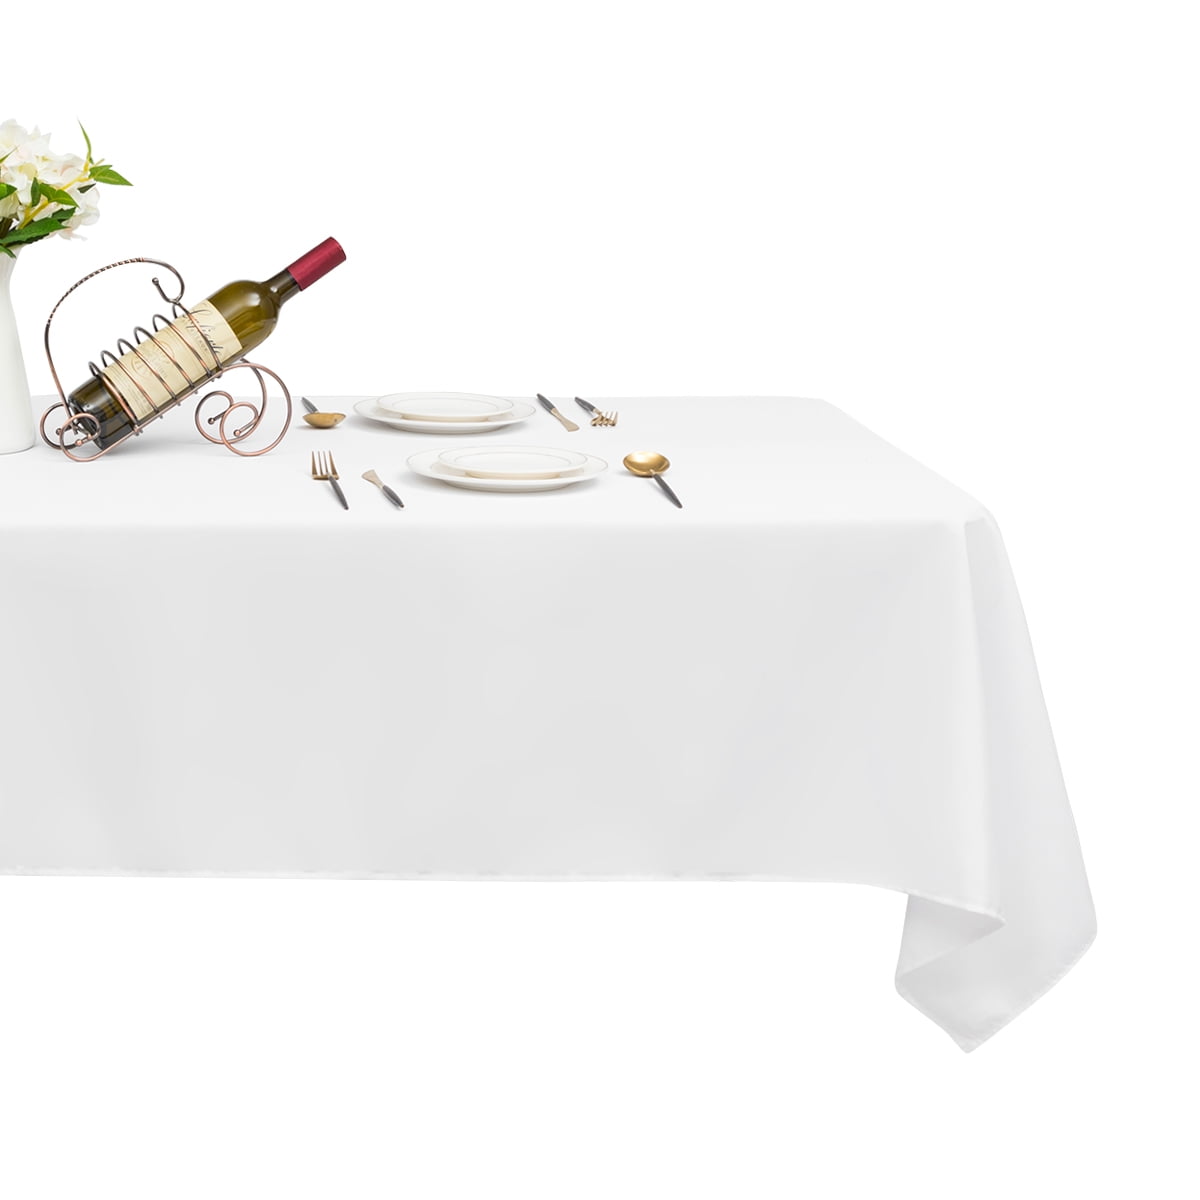 White PLAIN Tablecloths Round Rectangle 220GSM POLYESTER WHOLESALE 5 &10 PIECE 